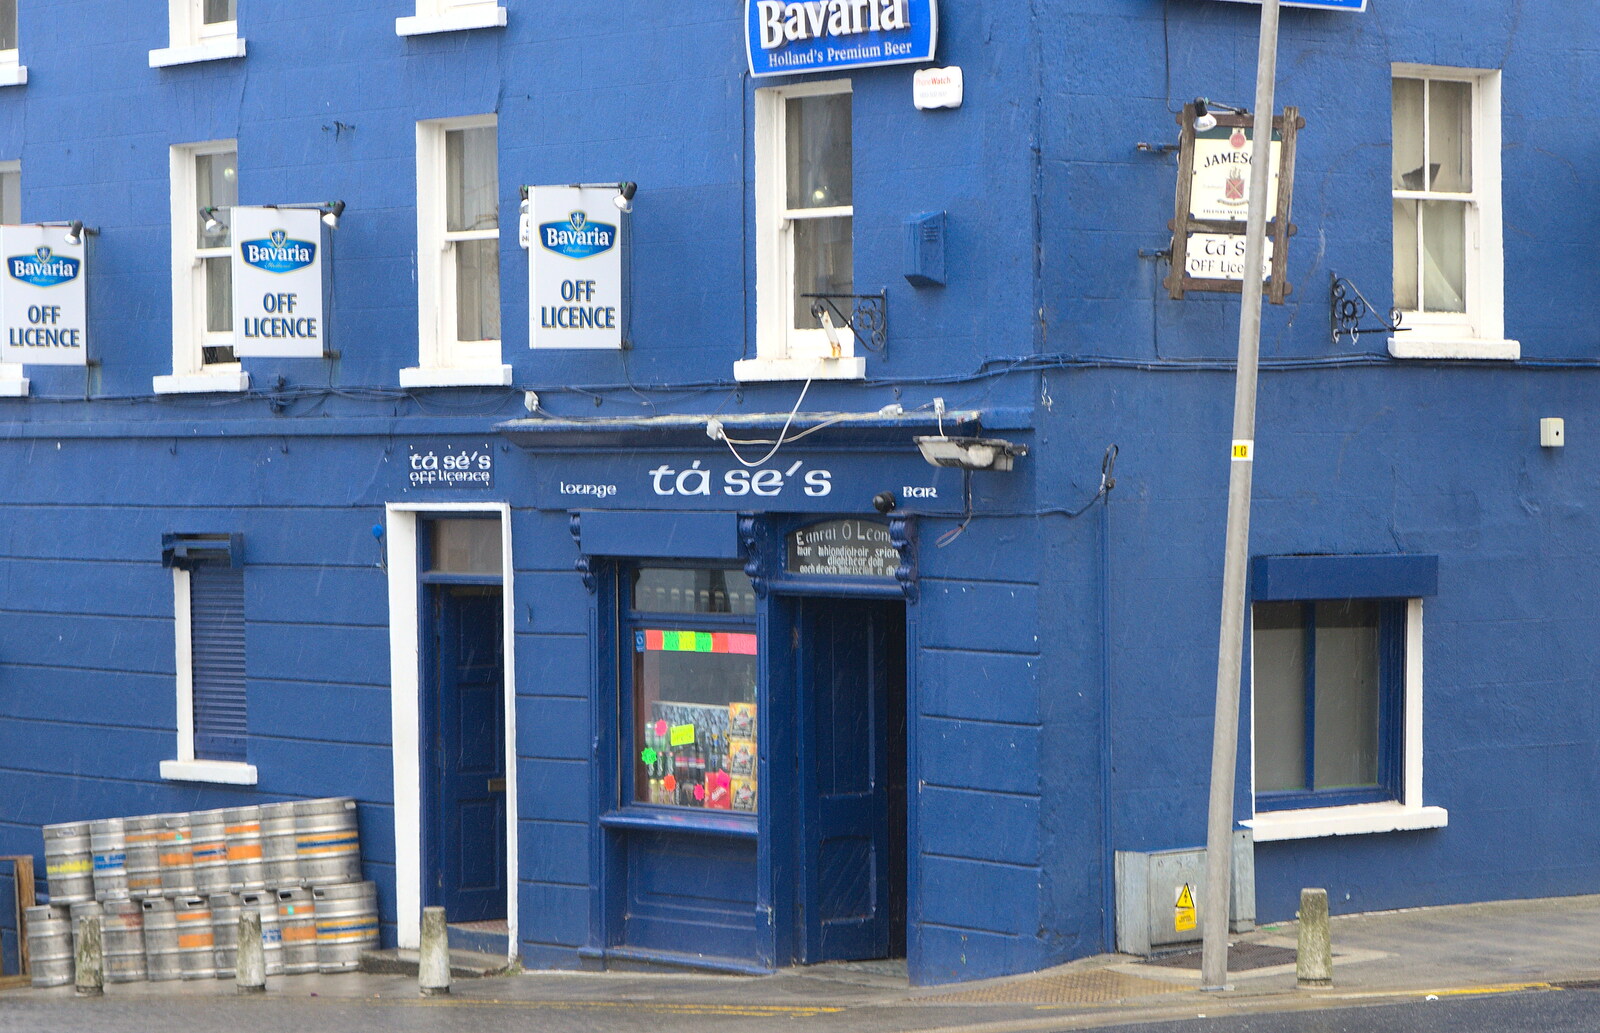 Tá sé's bar in Wicklow from Camping at Silver Strand, Wicklow, County Wicklow, Ireland - 7th August 2014